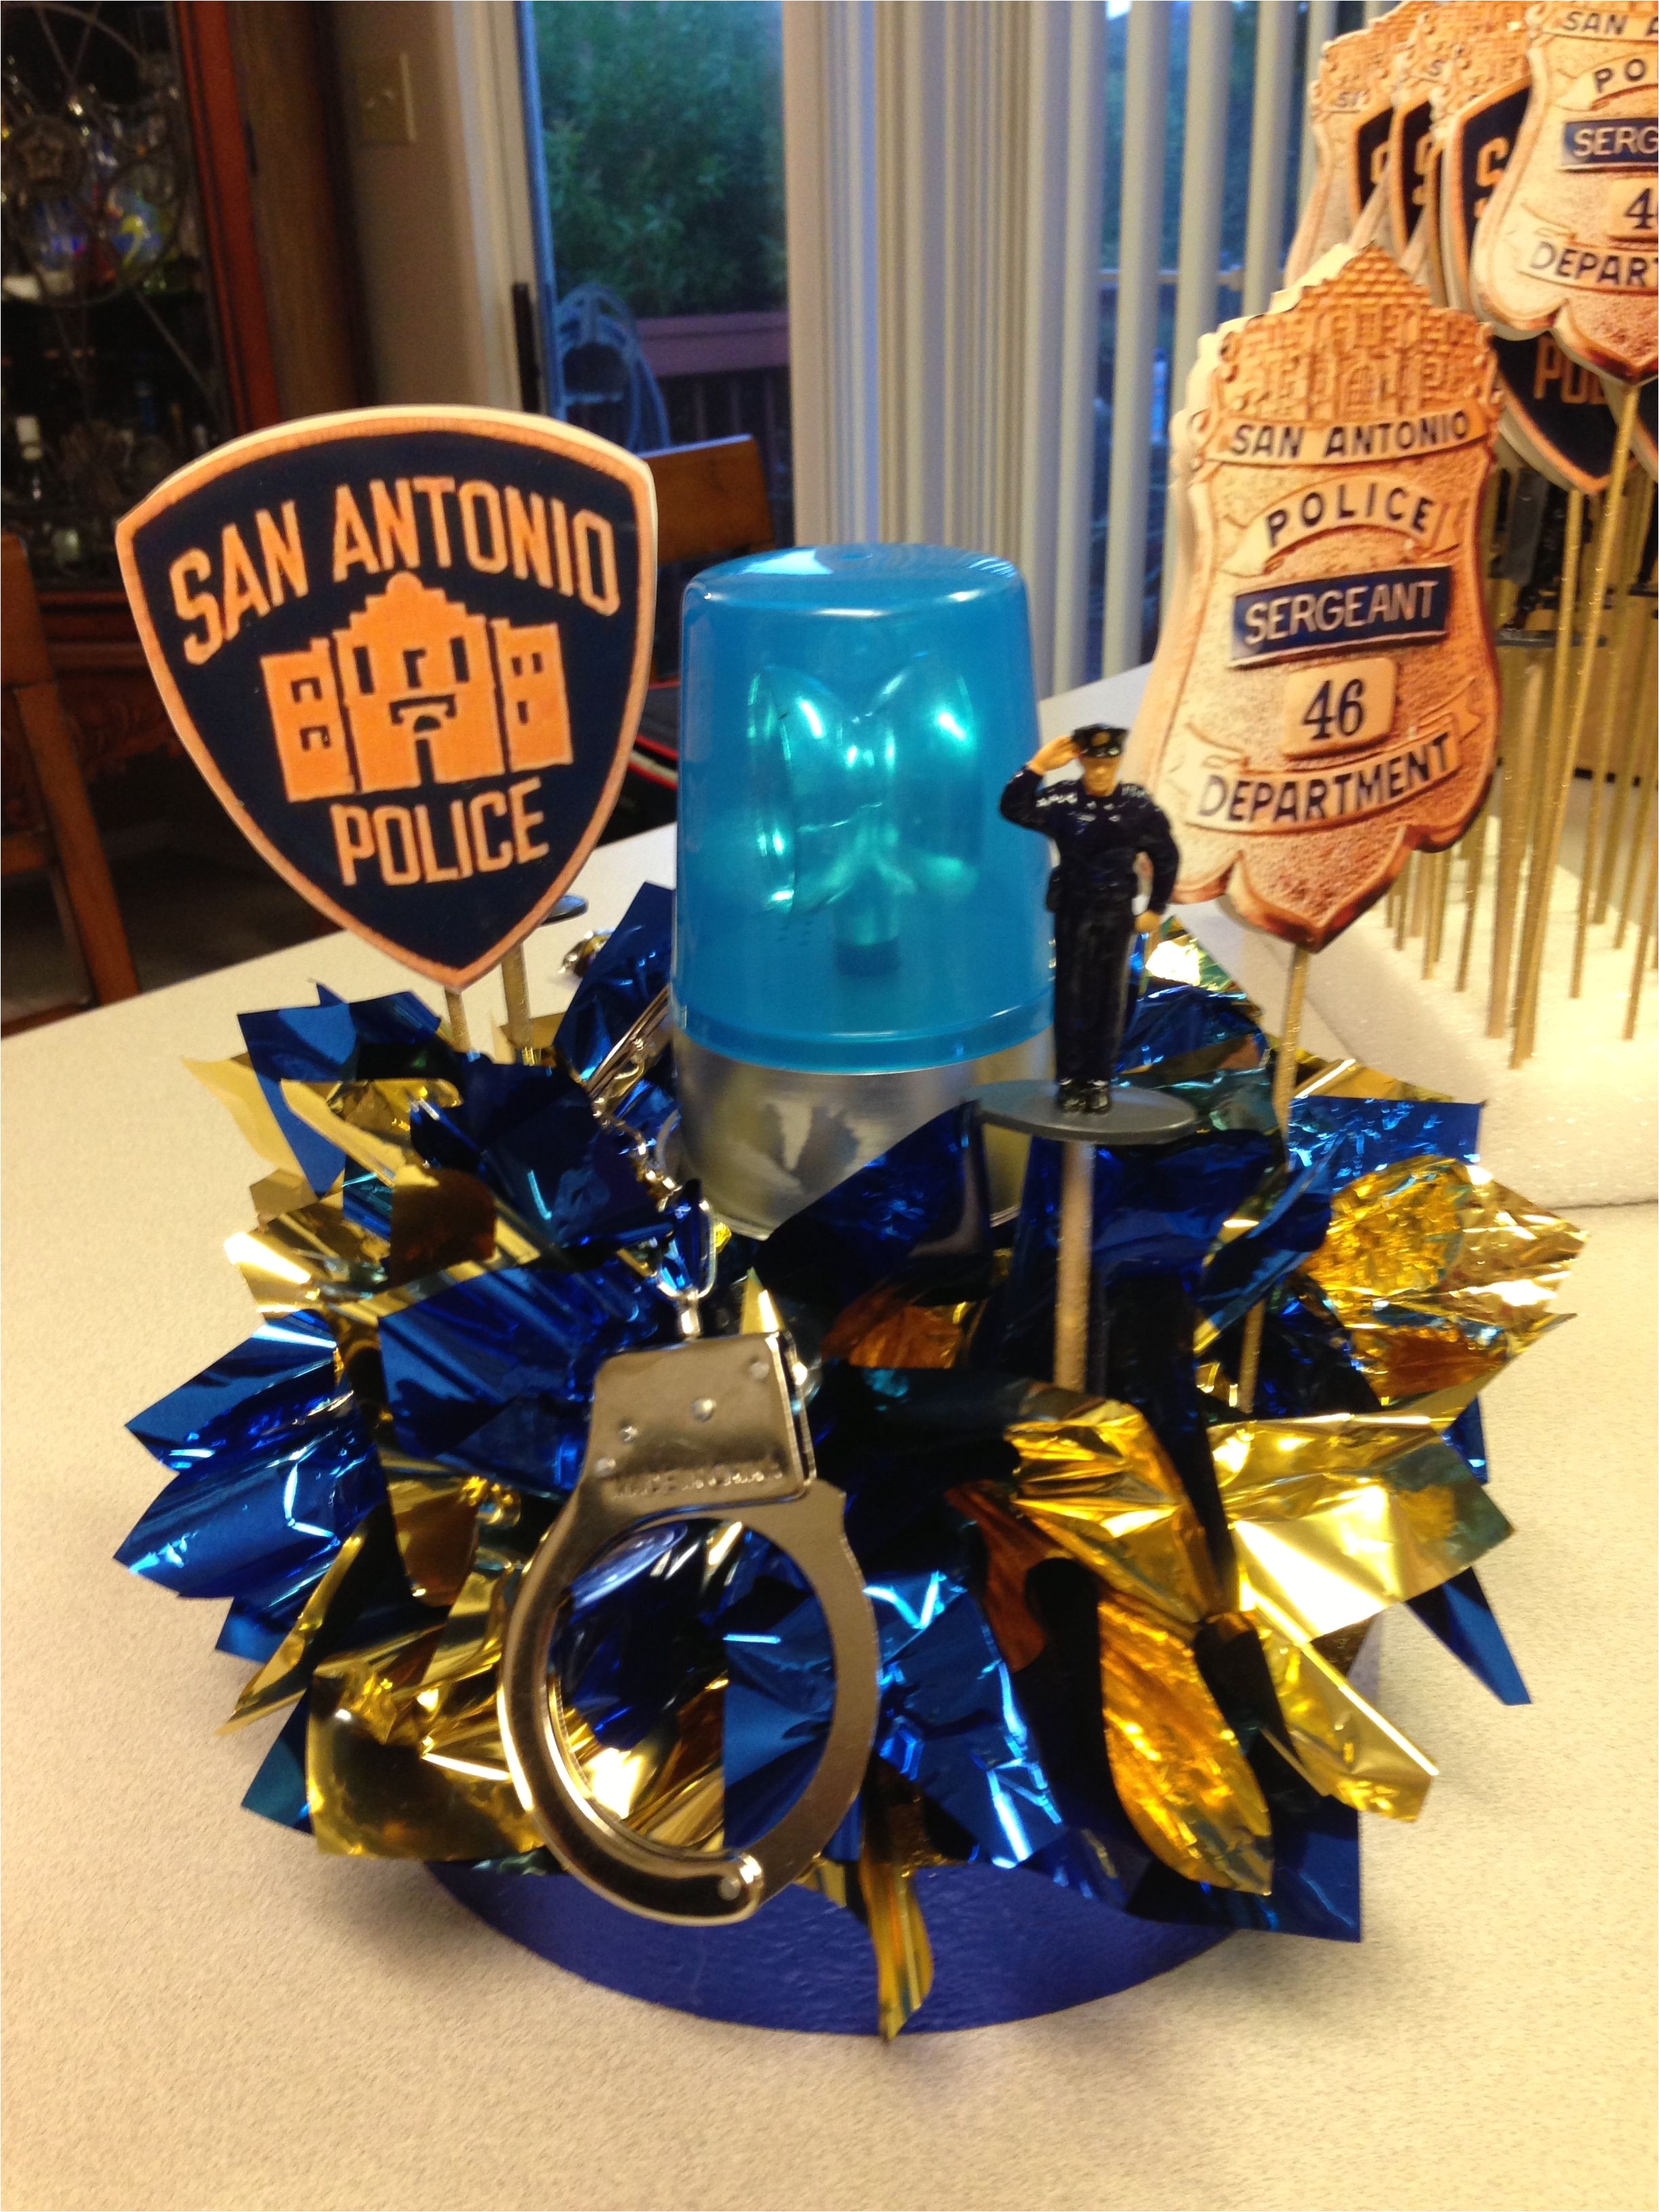 Police Retirement Decoration Ideas Police Party Diy Centerpiece for Police Officer Retirement Design Of